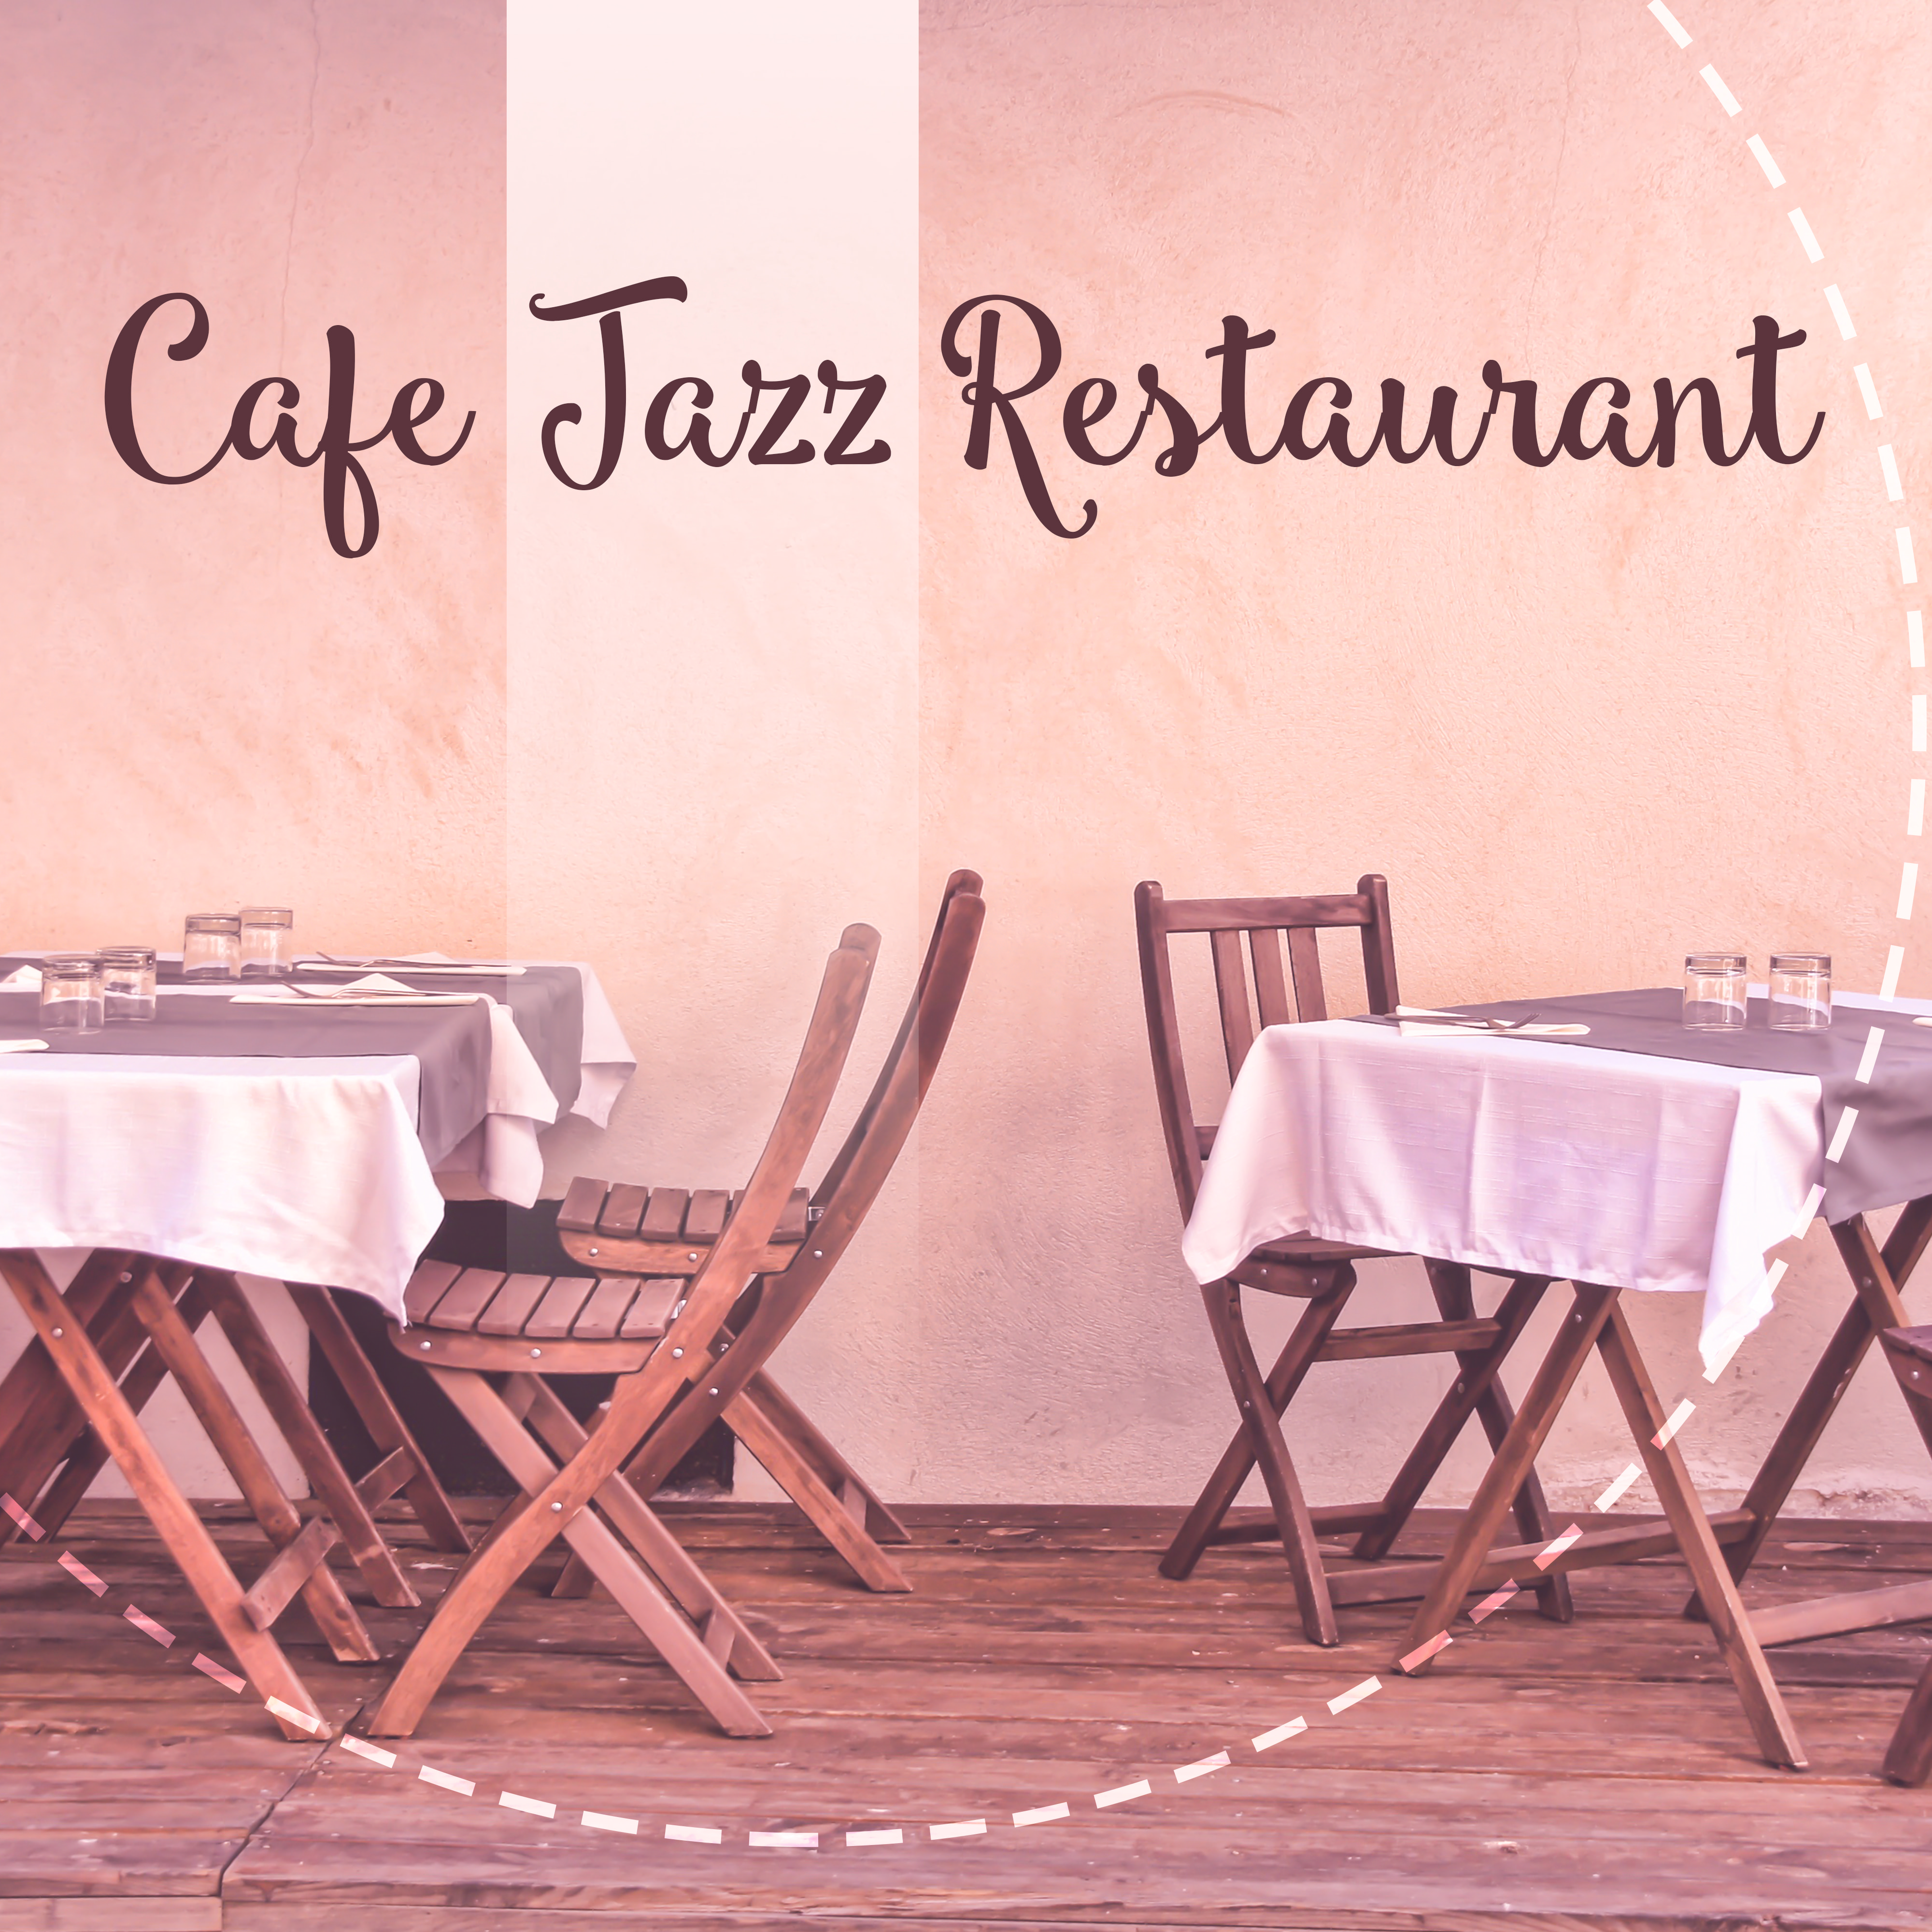 Cafe Jazz Restaurant  Smooth Sounds to Relax, Easy Listening, Piano Bar, Shades of Jazz, Moonlight Note